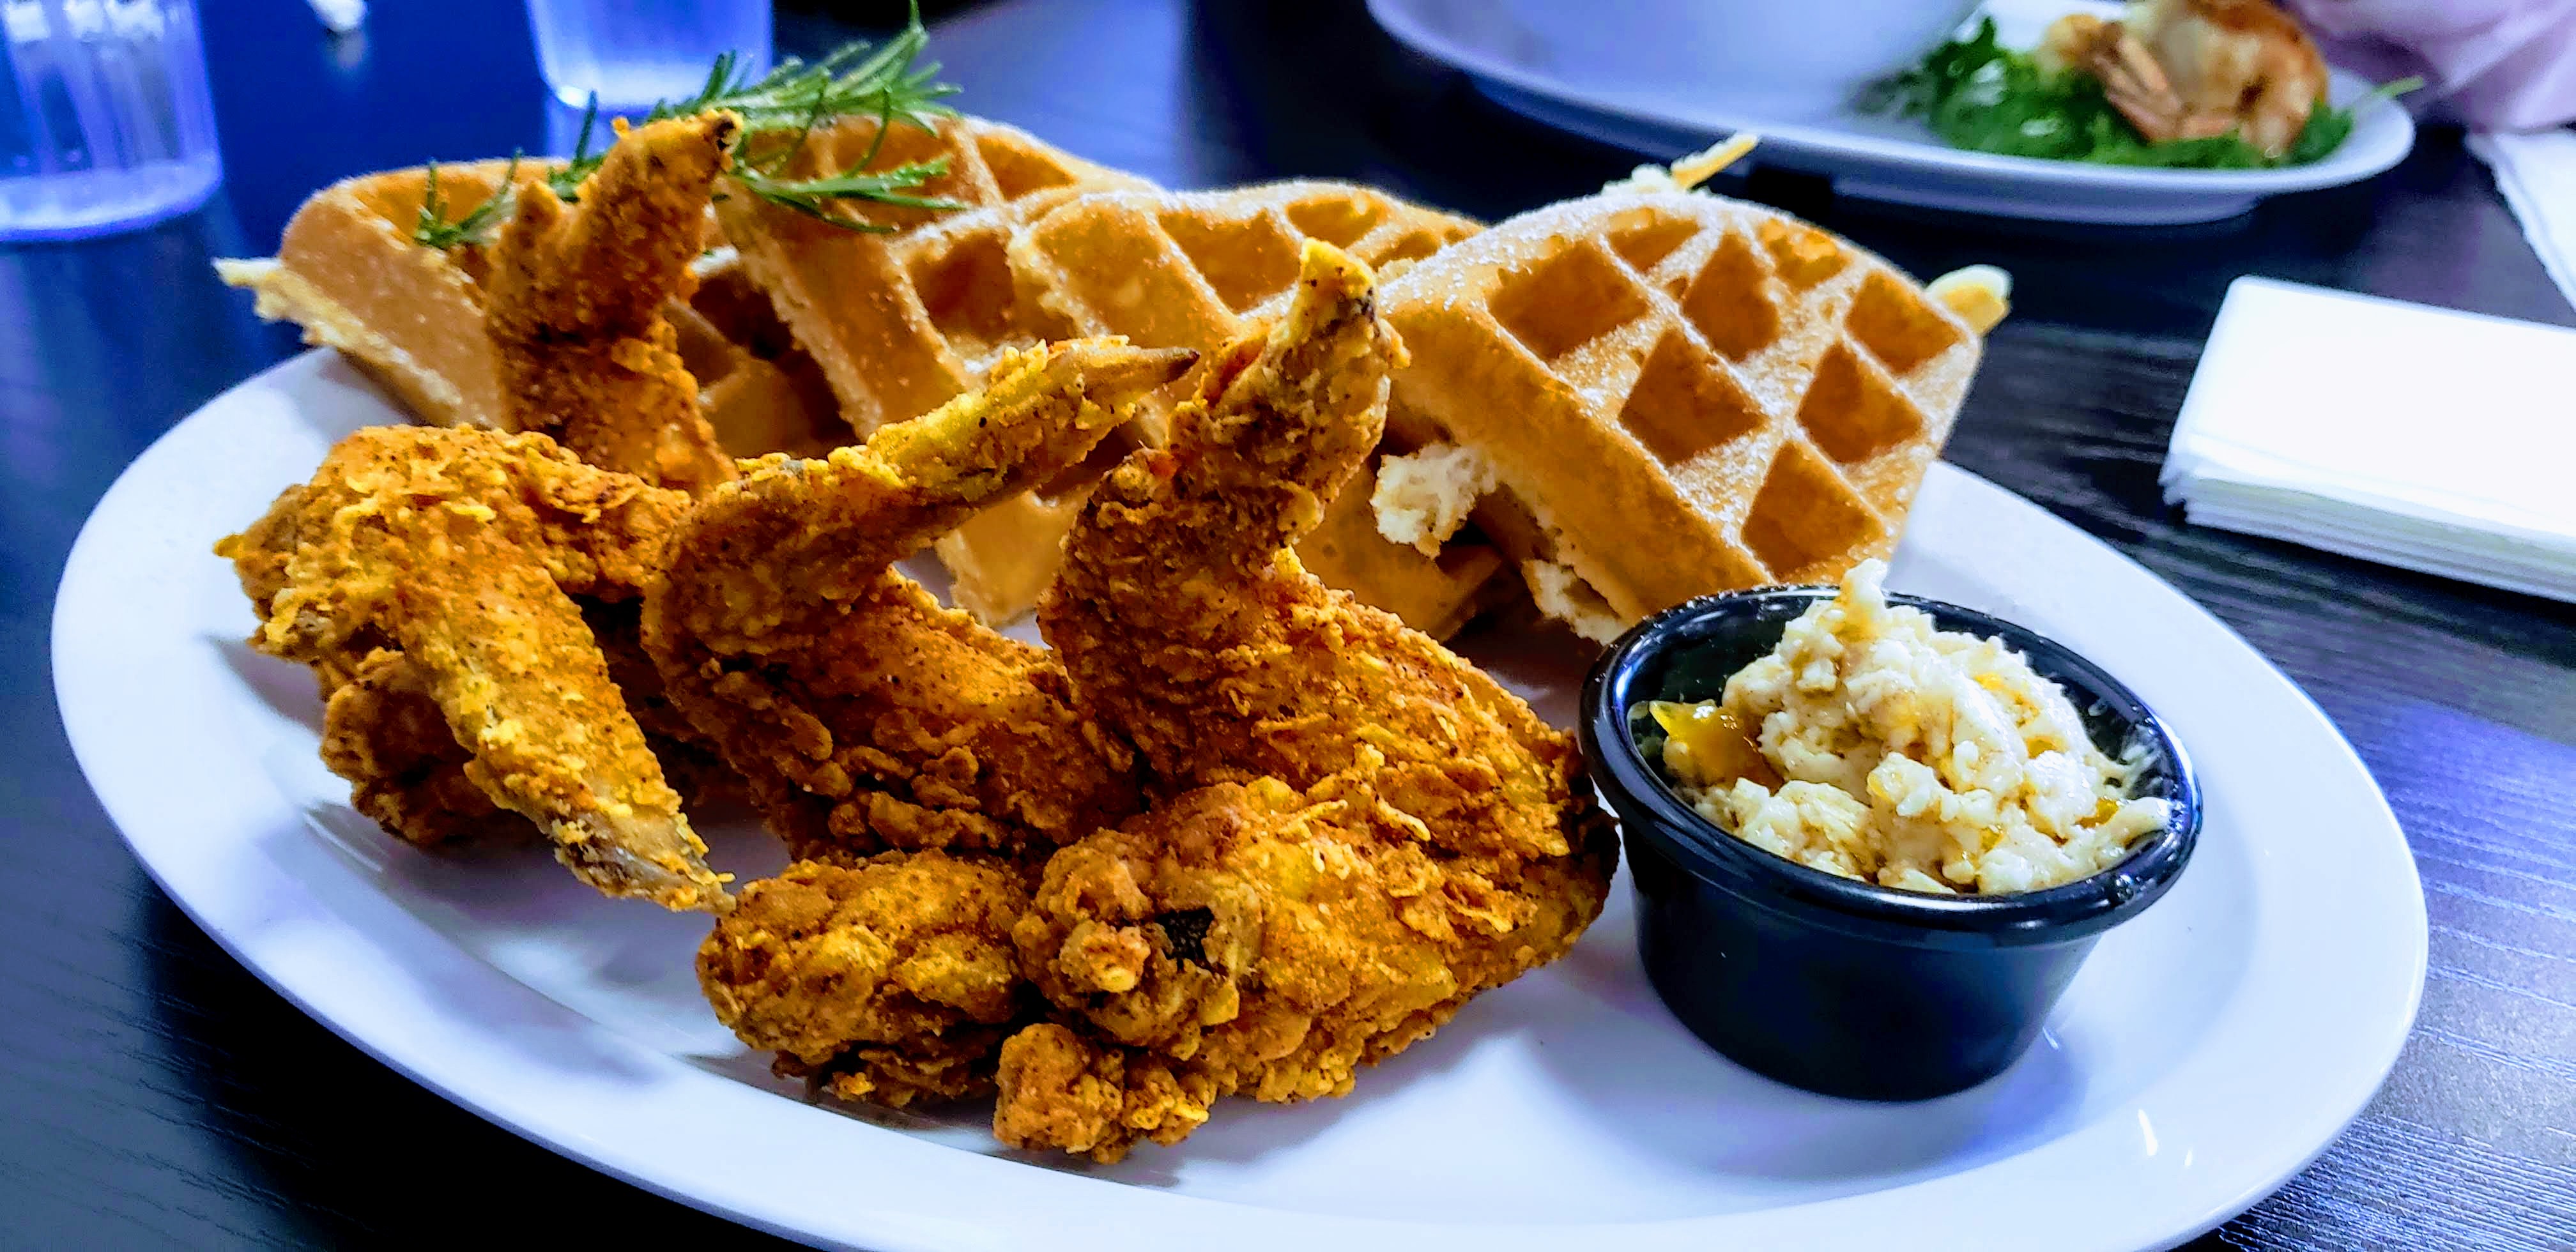 Chicken and waffles at Court Cafe Westchester .